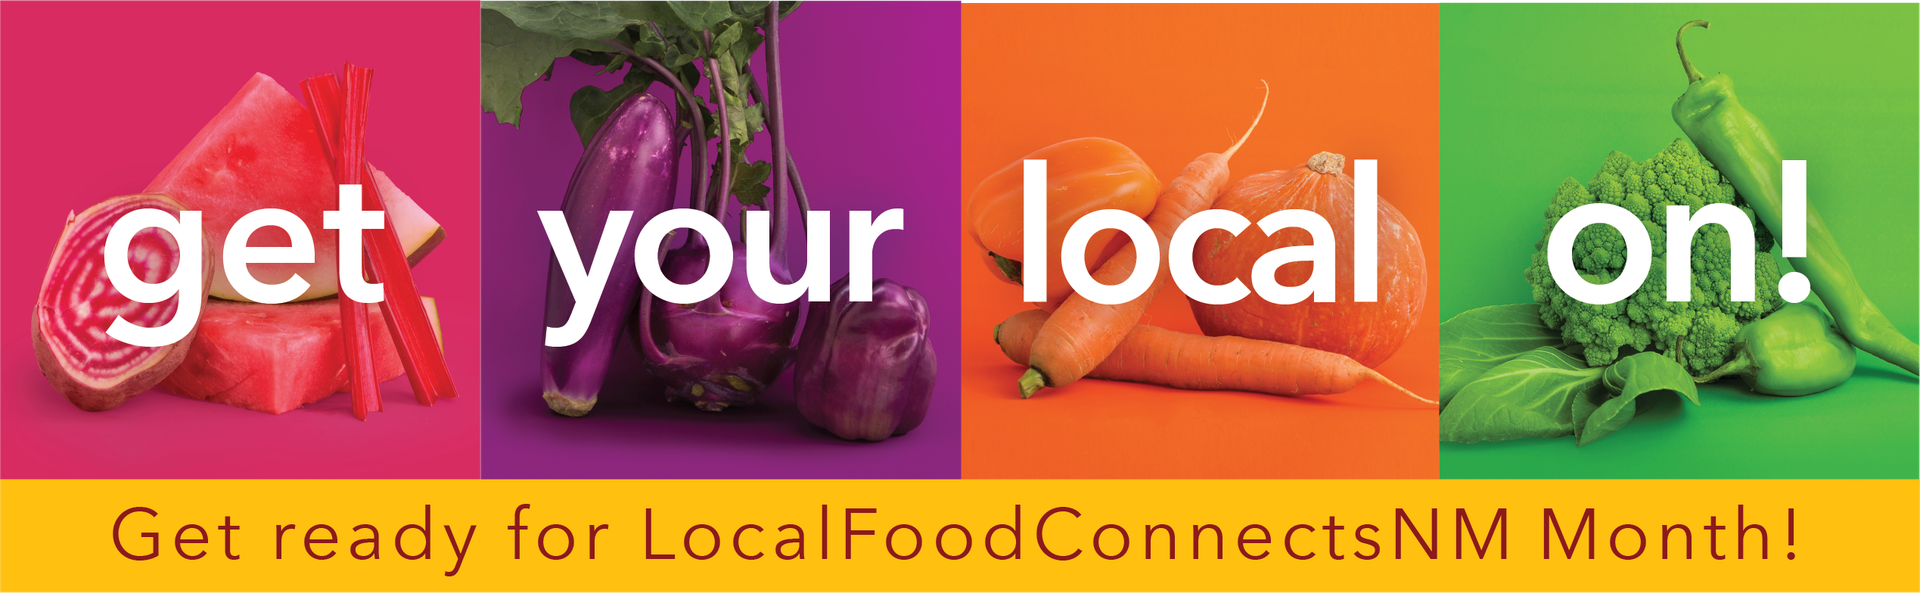 Local Food Connects Month header with fresh produce, colorful